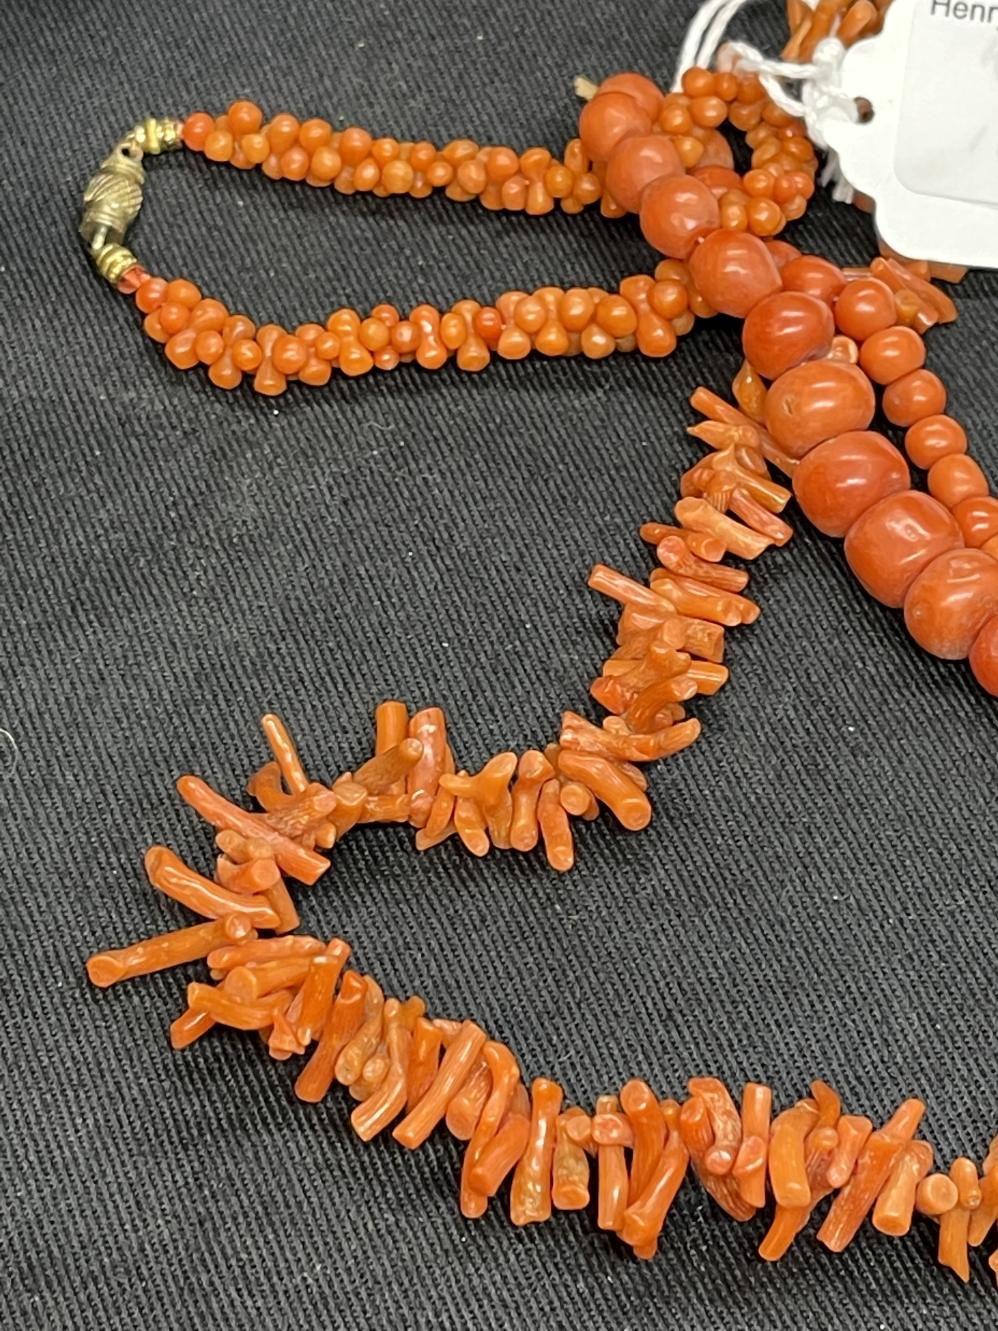 Jewellery: Necklets two coral, one bead and one branch style, plus one bracelet. - Image 2 of 3